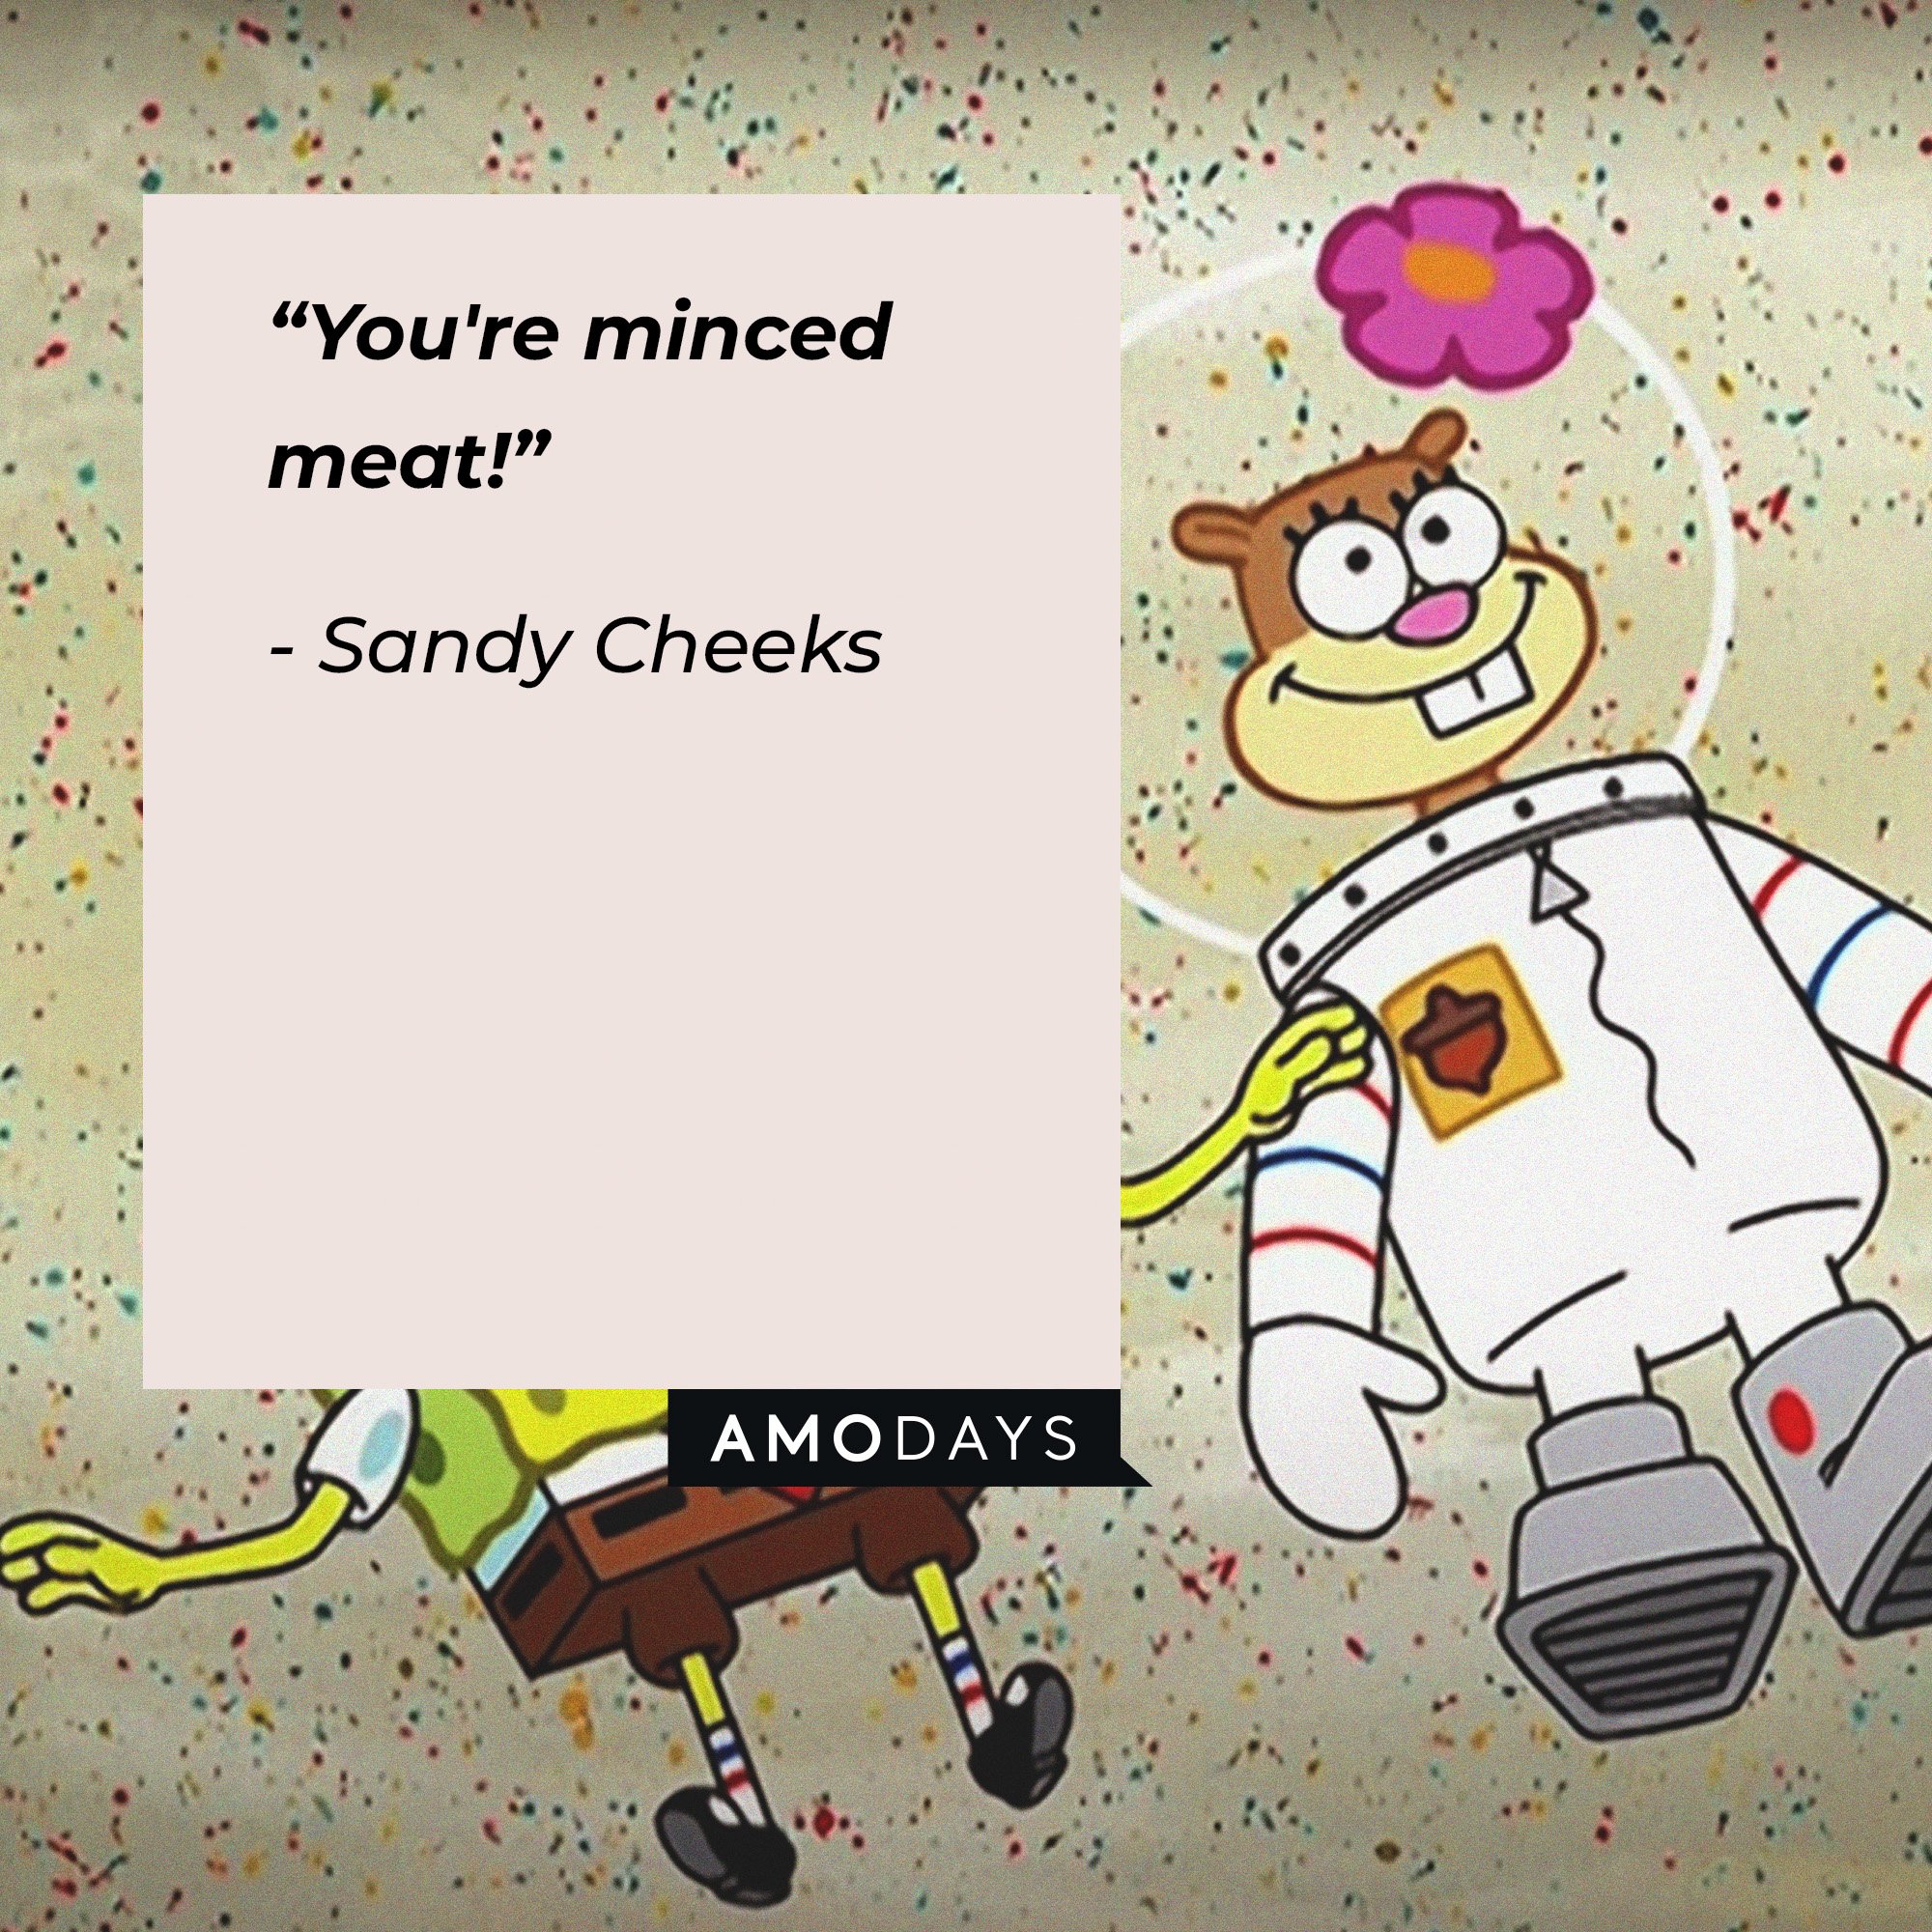 Sandy Cheeks's quote: “You're minced meat!” | Image: AmoDays 